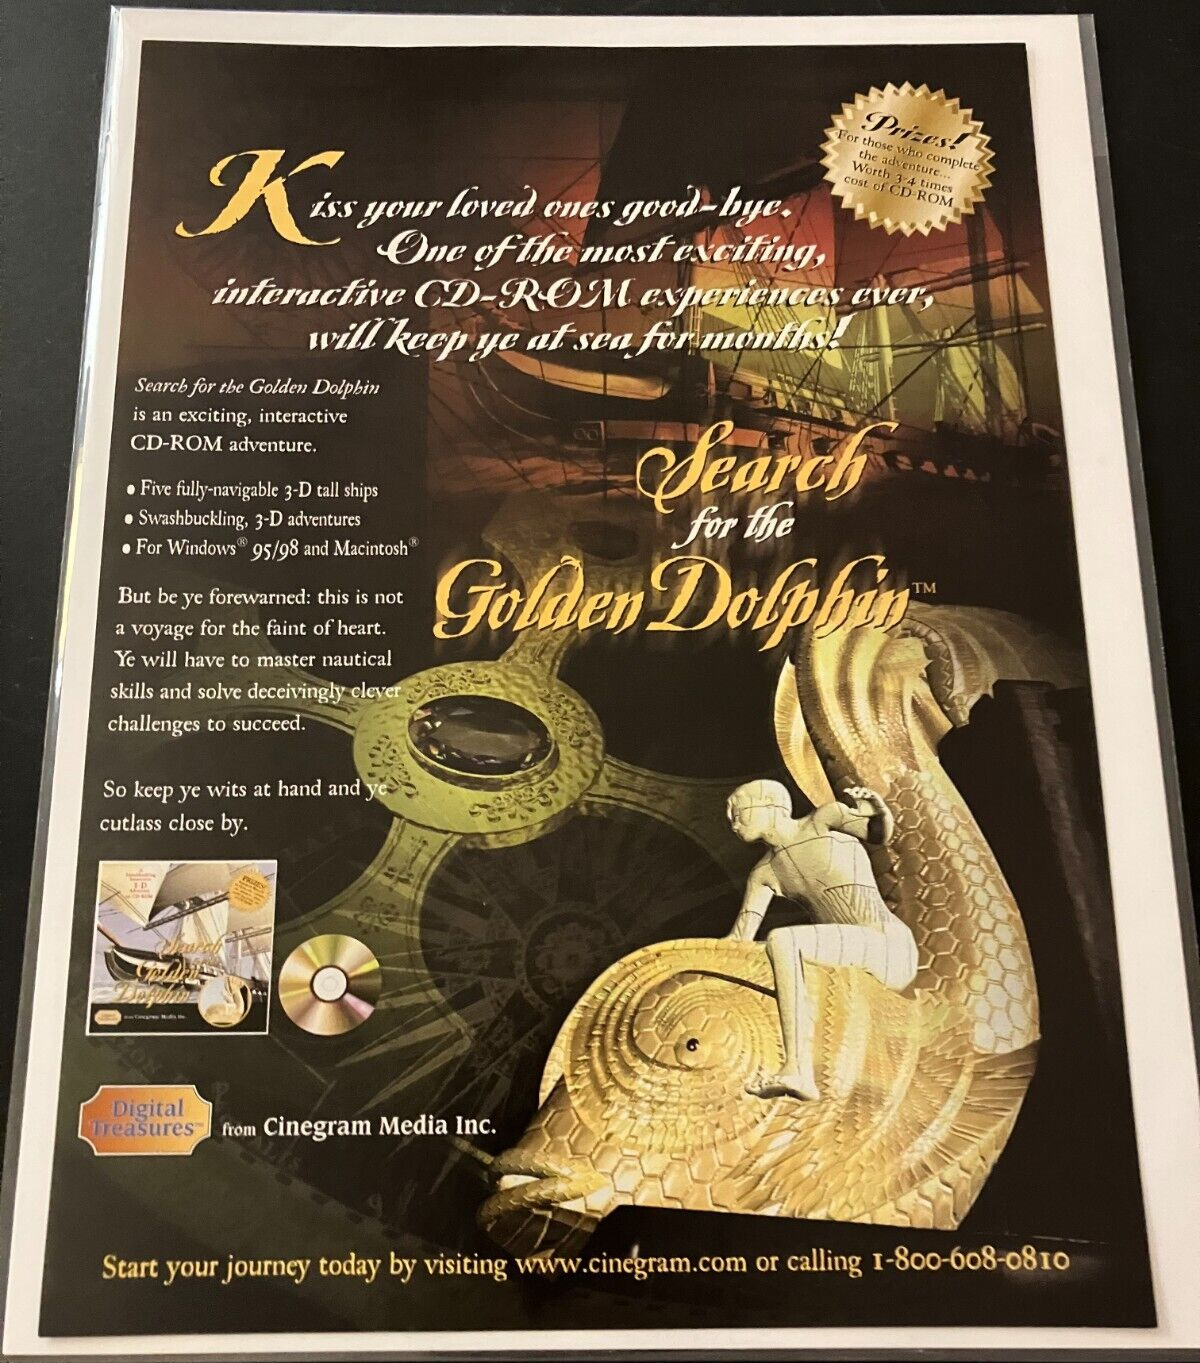 Search For The Golden Dolphin - Vintage 1999 Gaming Print Ad Poster - CD-ROM Adv